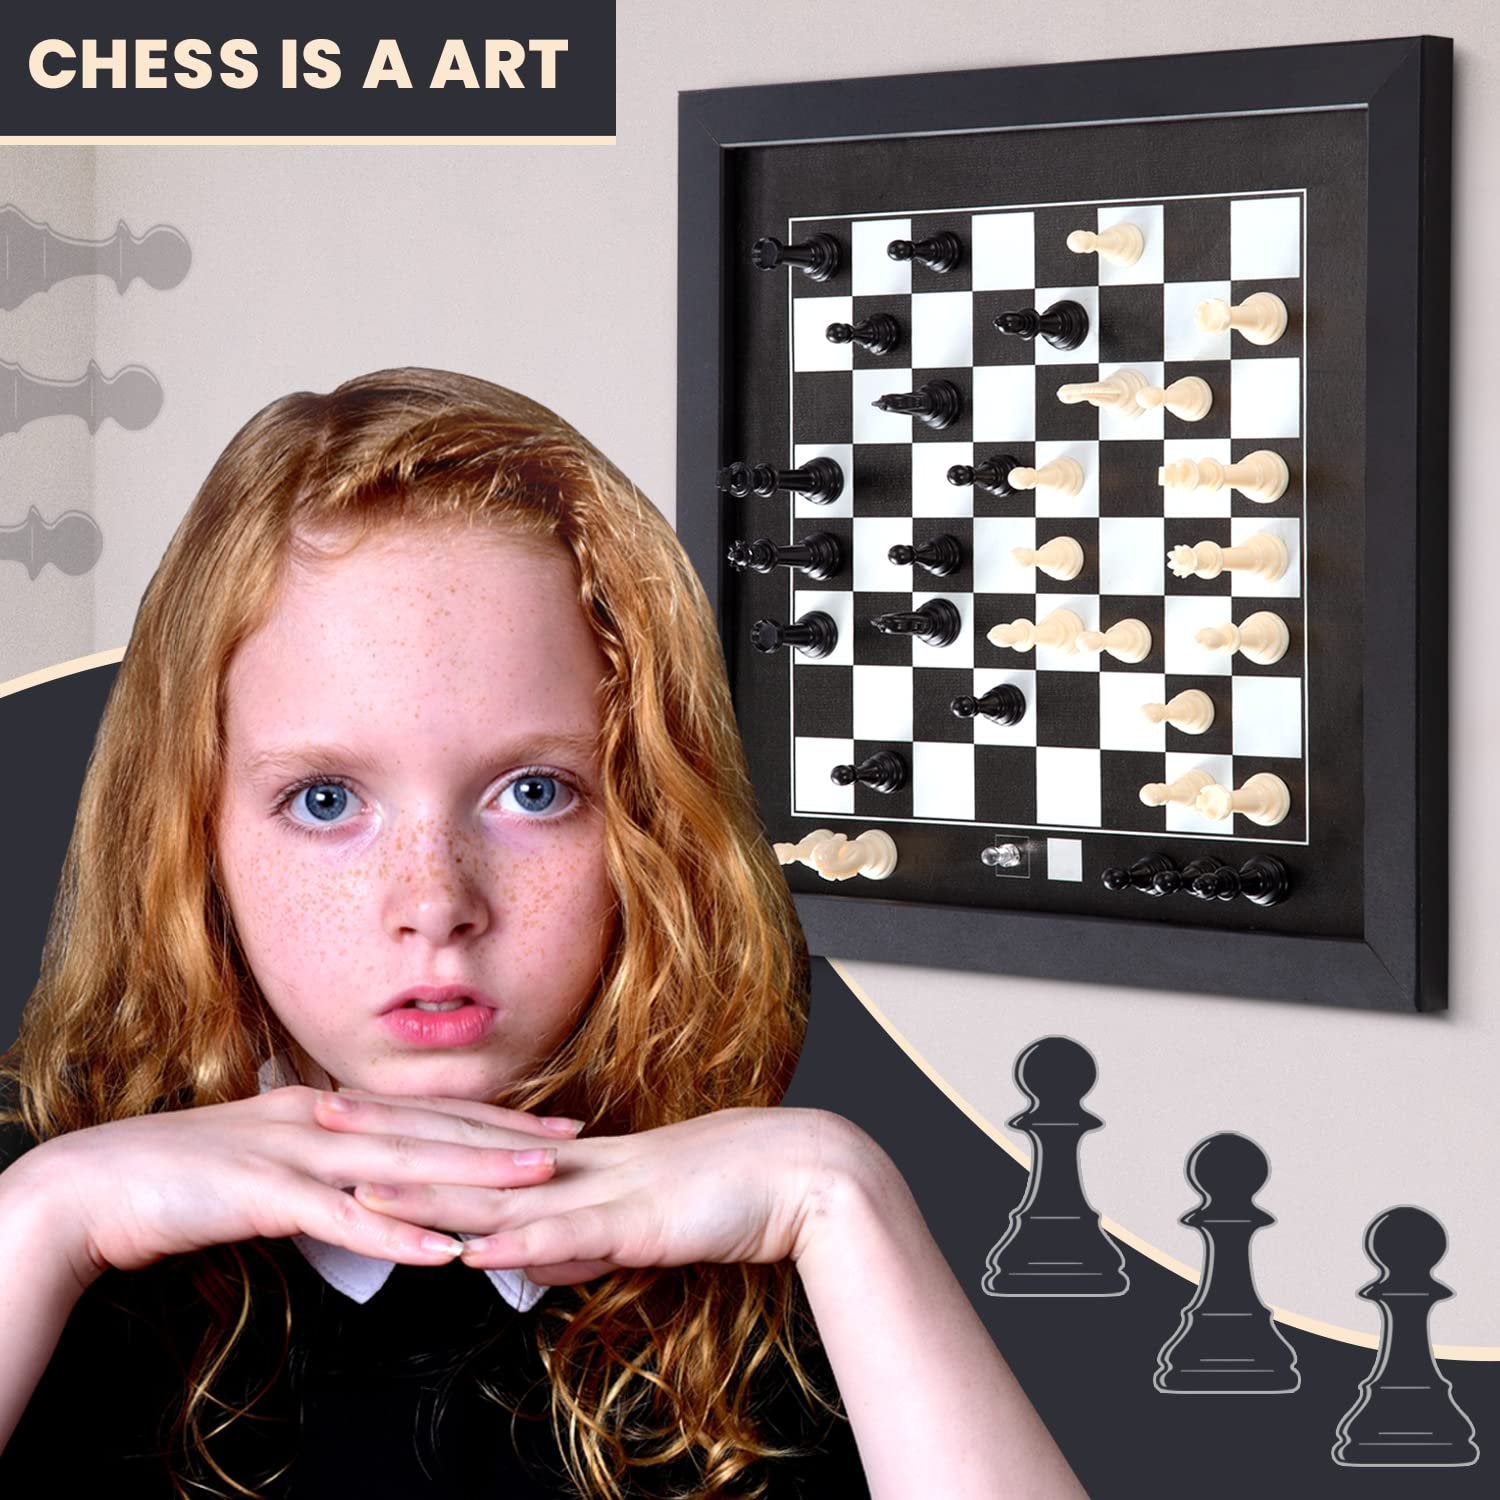 Bundaloo Hanging Magnetic Wall Chess Set - Wooden Board with Black & White Game Pieces - Chessboard Playing Art & Decor for Home and Office